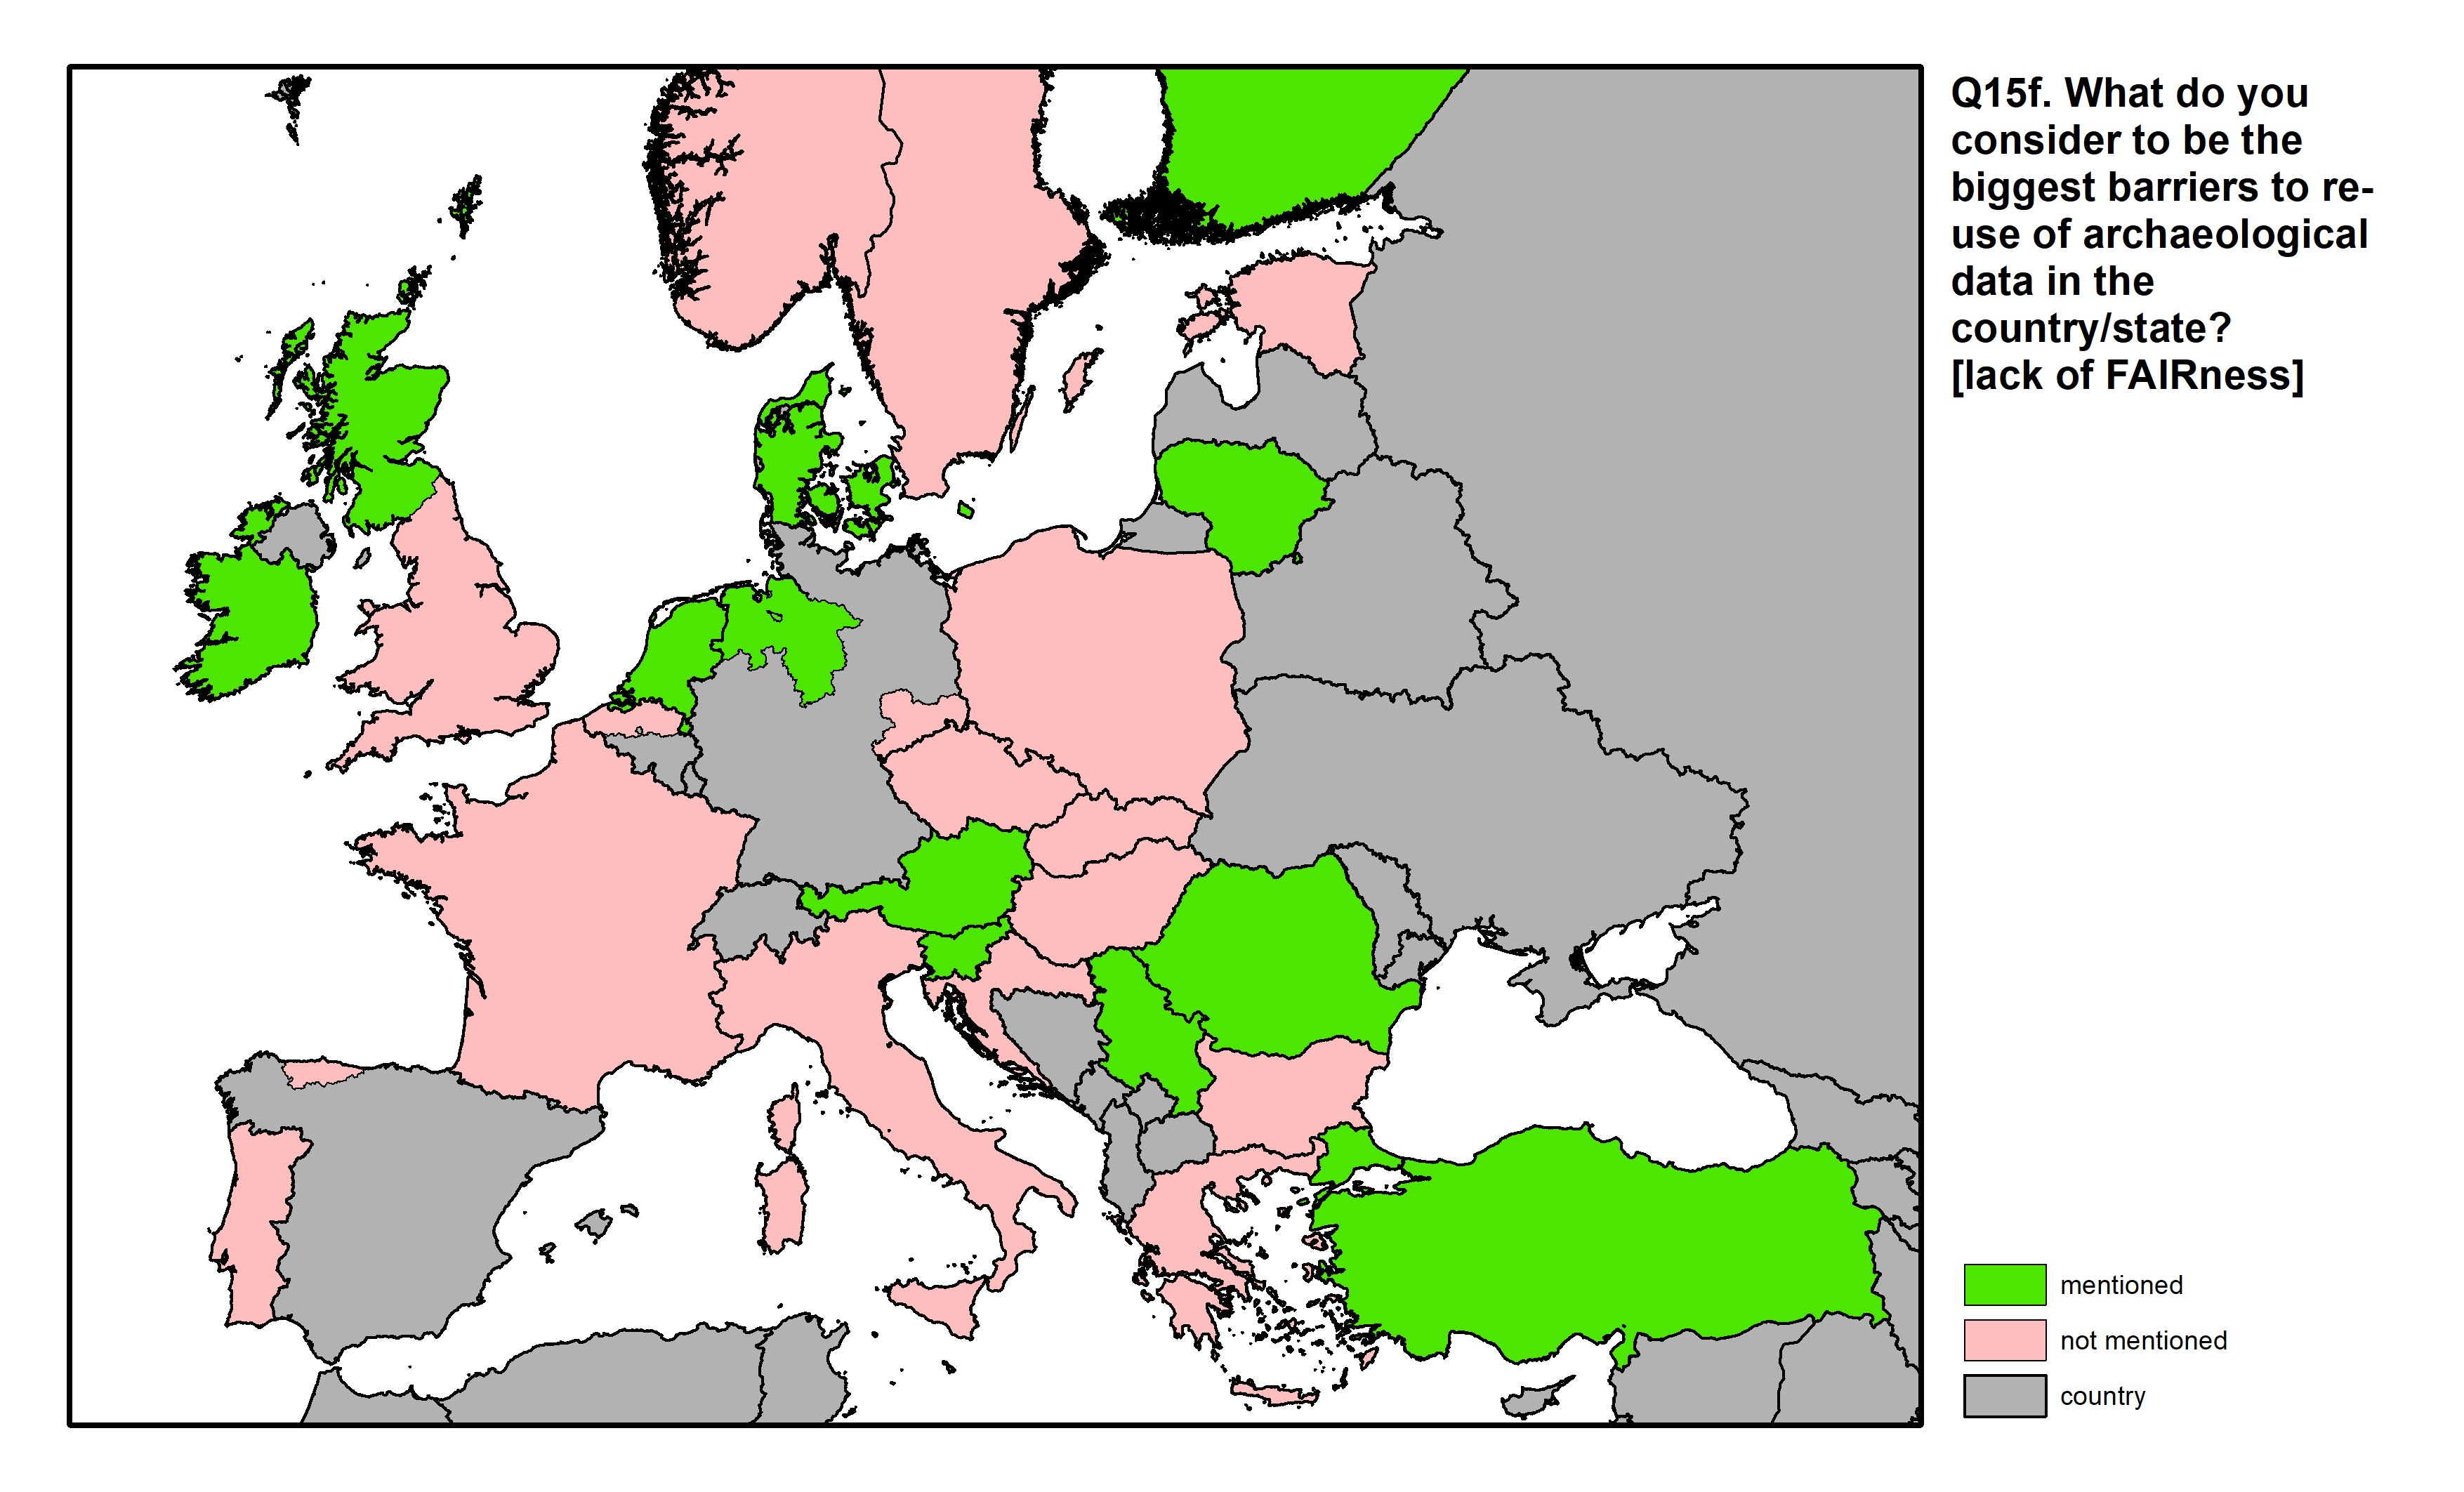 Figure 54: a map of Europe showing countries and regions in colour based on response rates to the survey question.